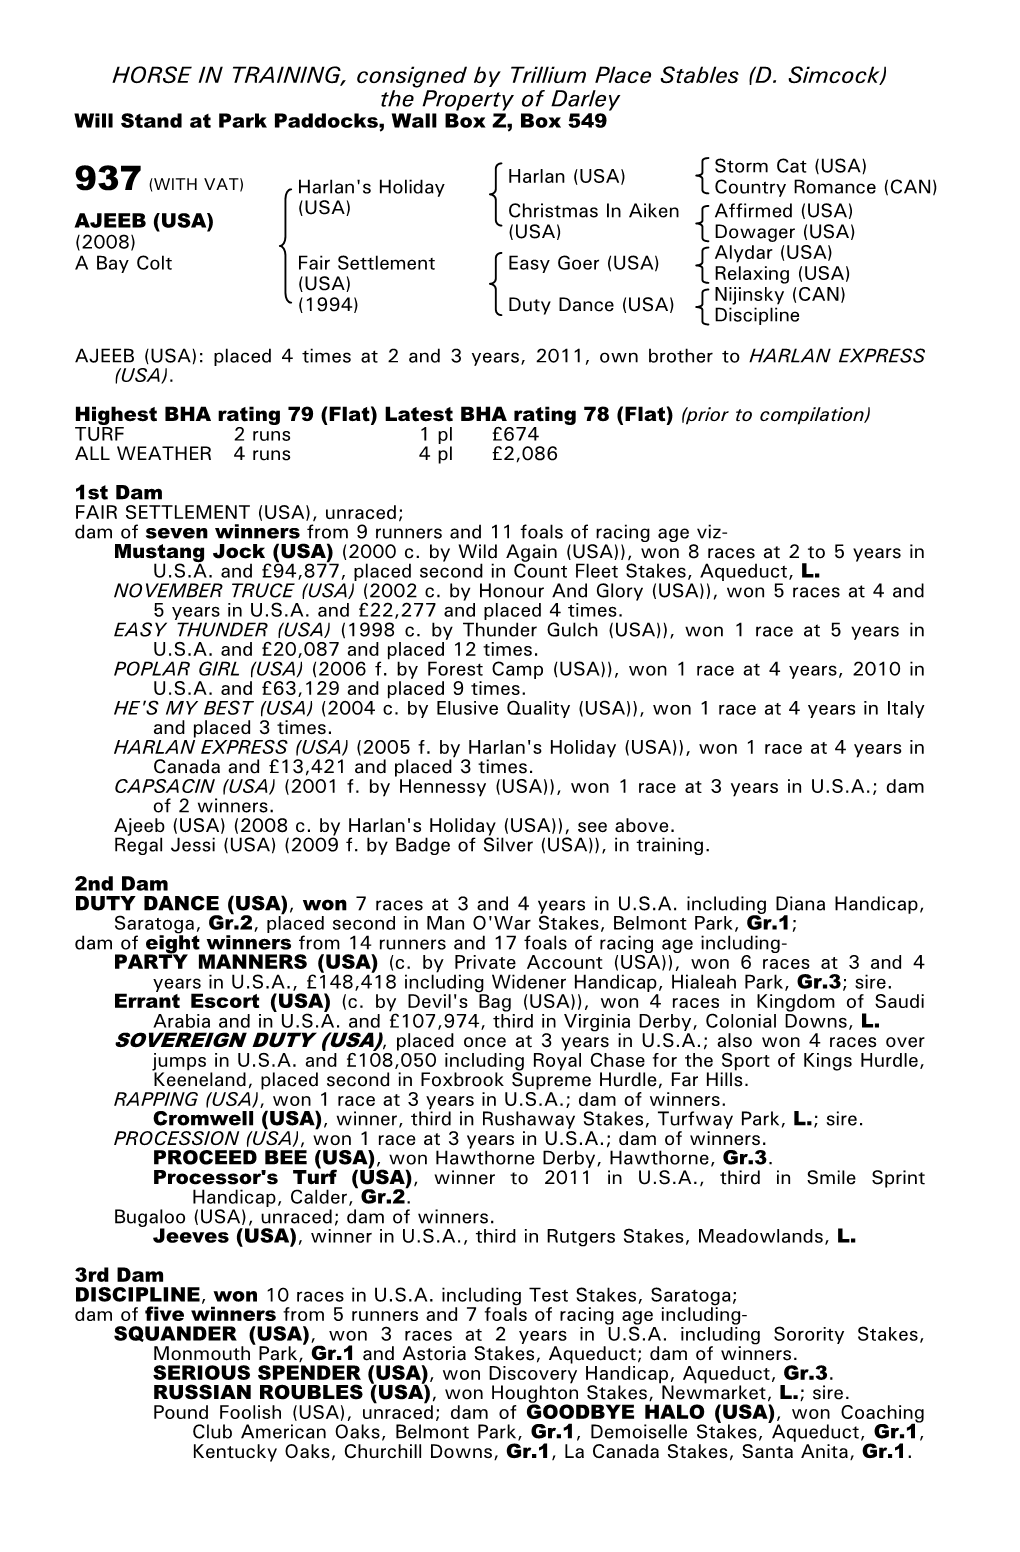 HORSE in TRAINING, Consigned by Trillium Place Stables (D. Simcock) the Property of Darley Will Stand at Park Paddocks, Wall Box Z, Box 549